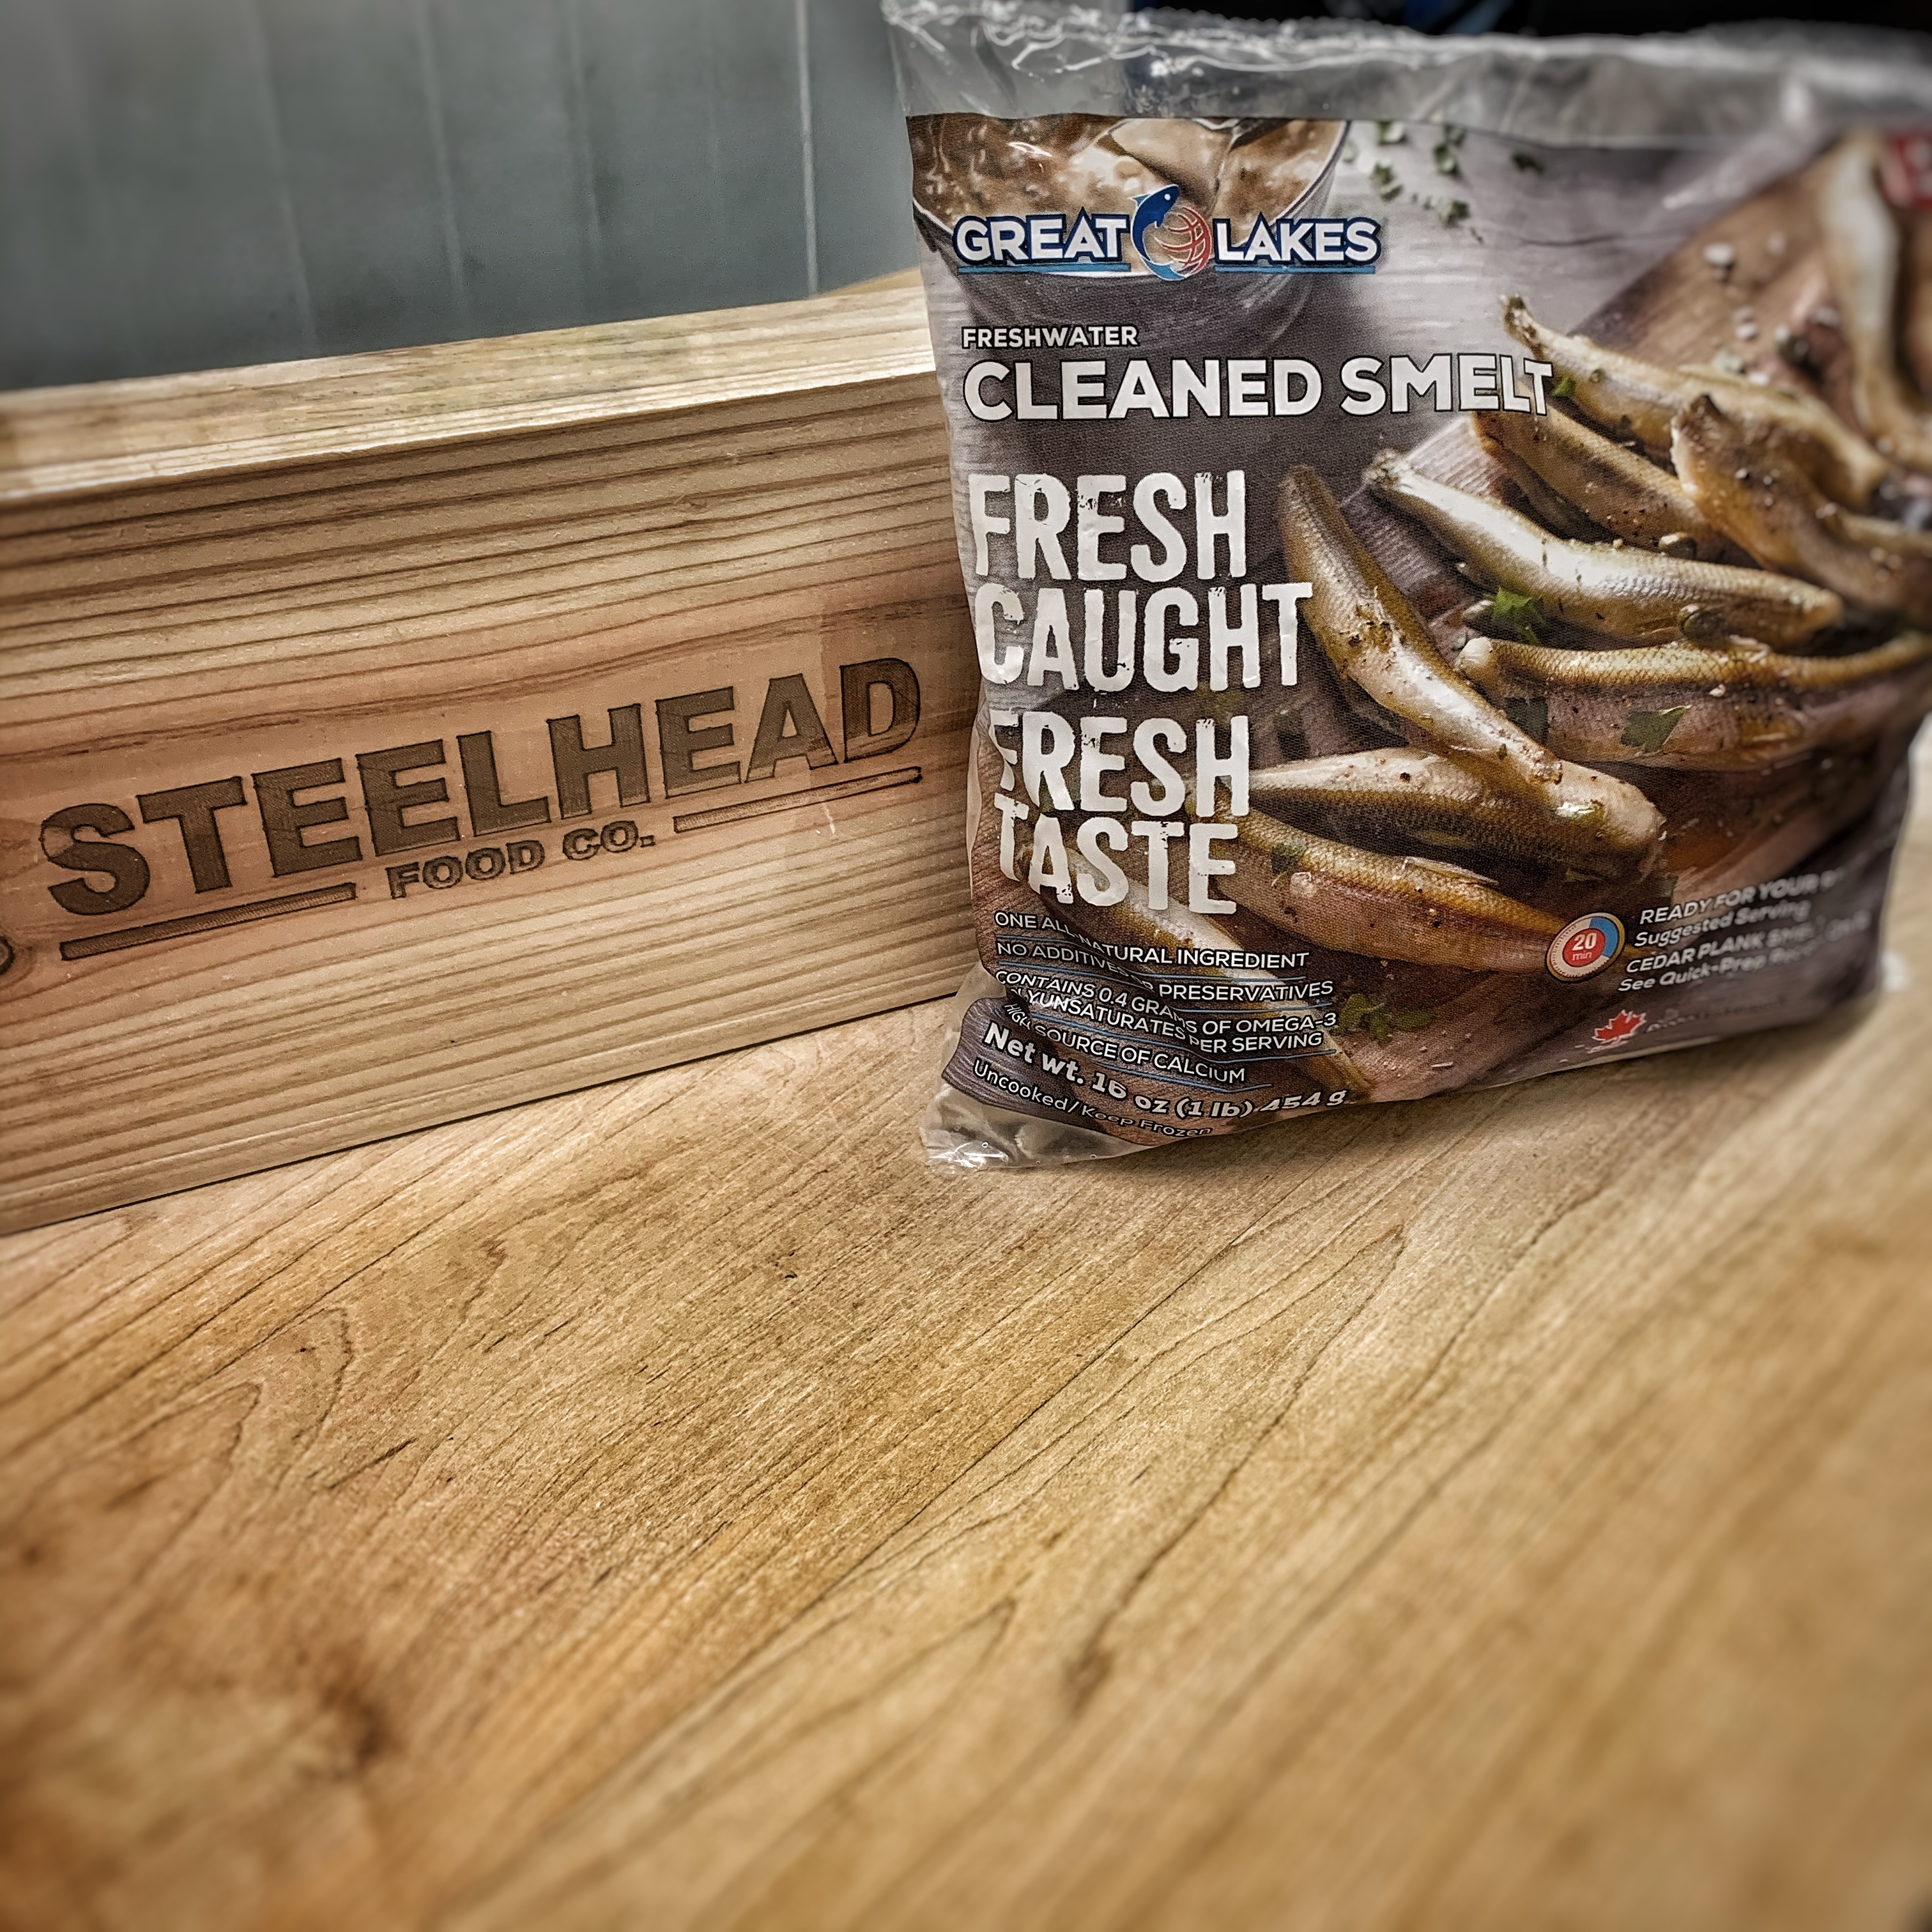 Steelhead Food Co.  Great Lakes - Cleaned Dressed Lake Smelts - FROZEN -  454g